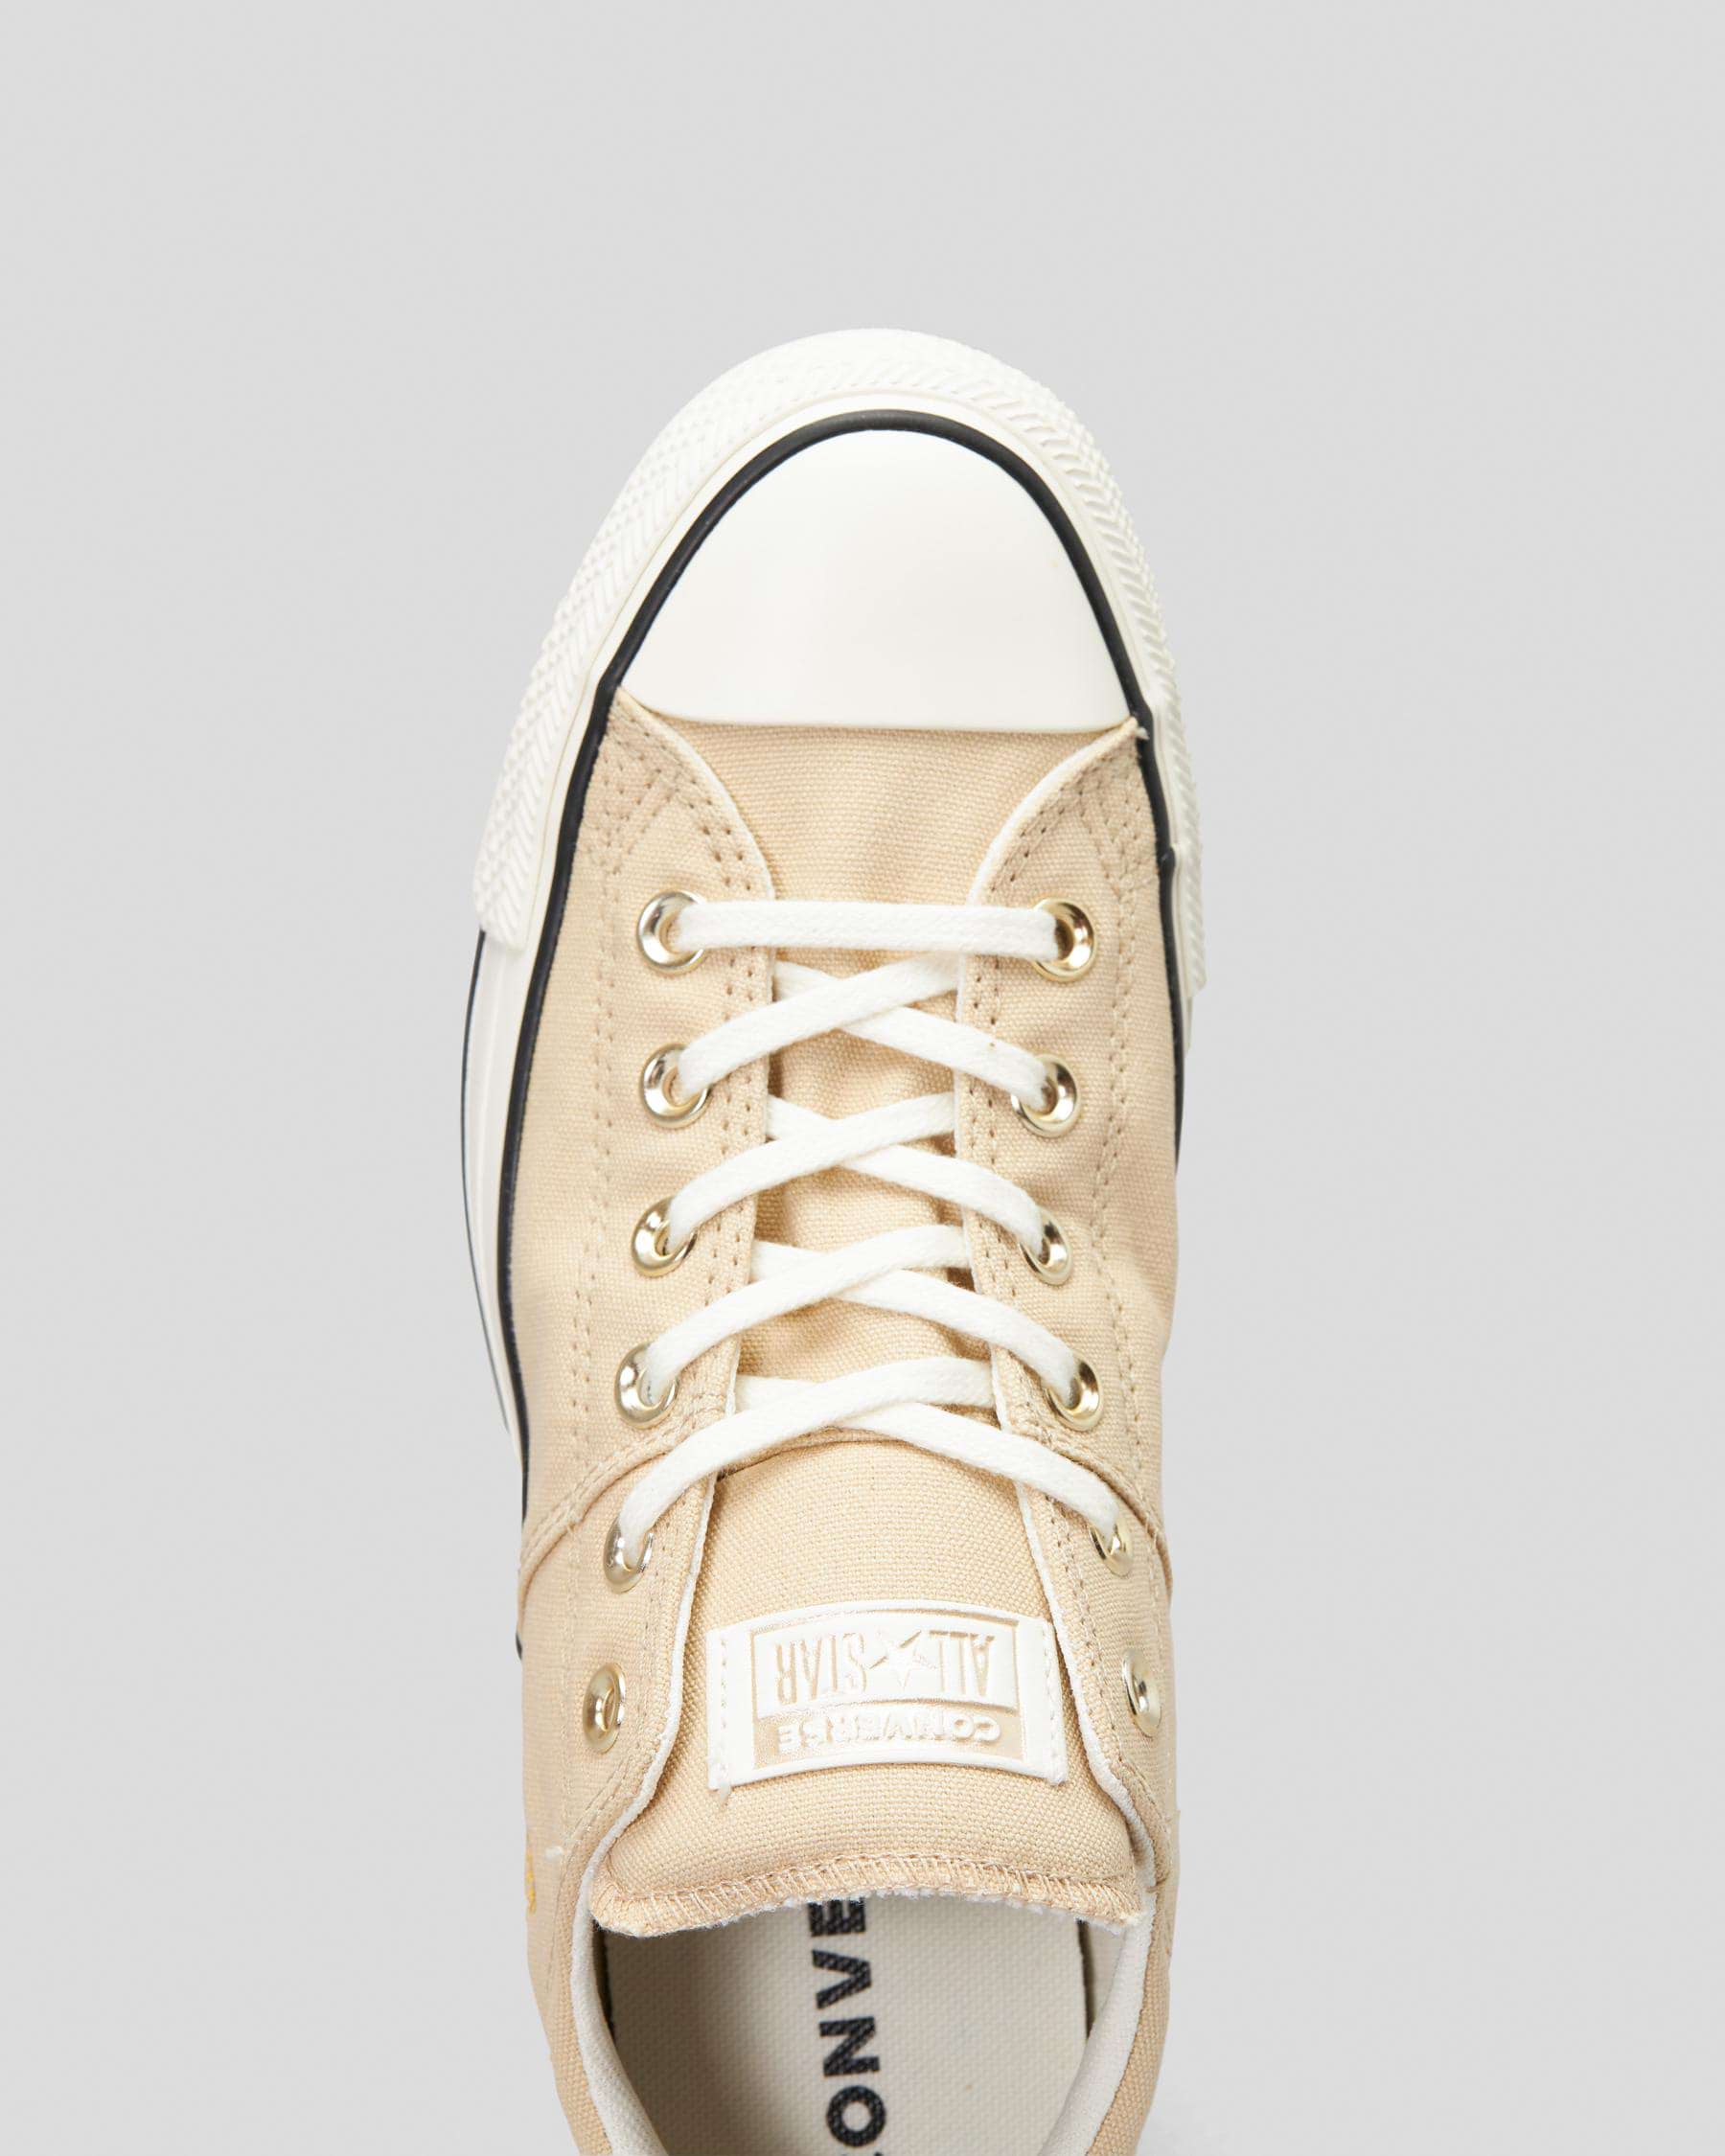 Converse Women's Chuck Taylor All Star Madison Low Top Sneakers (White) - Size 10.0 M